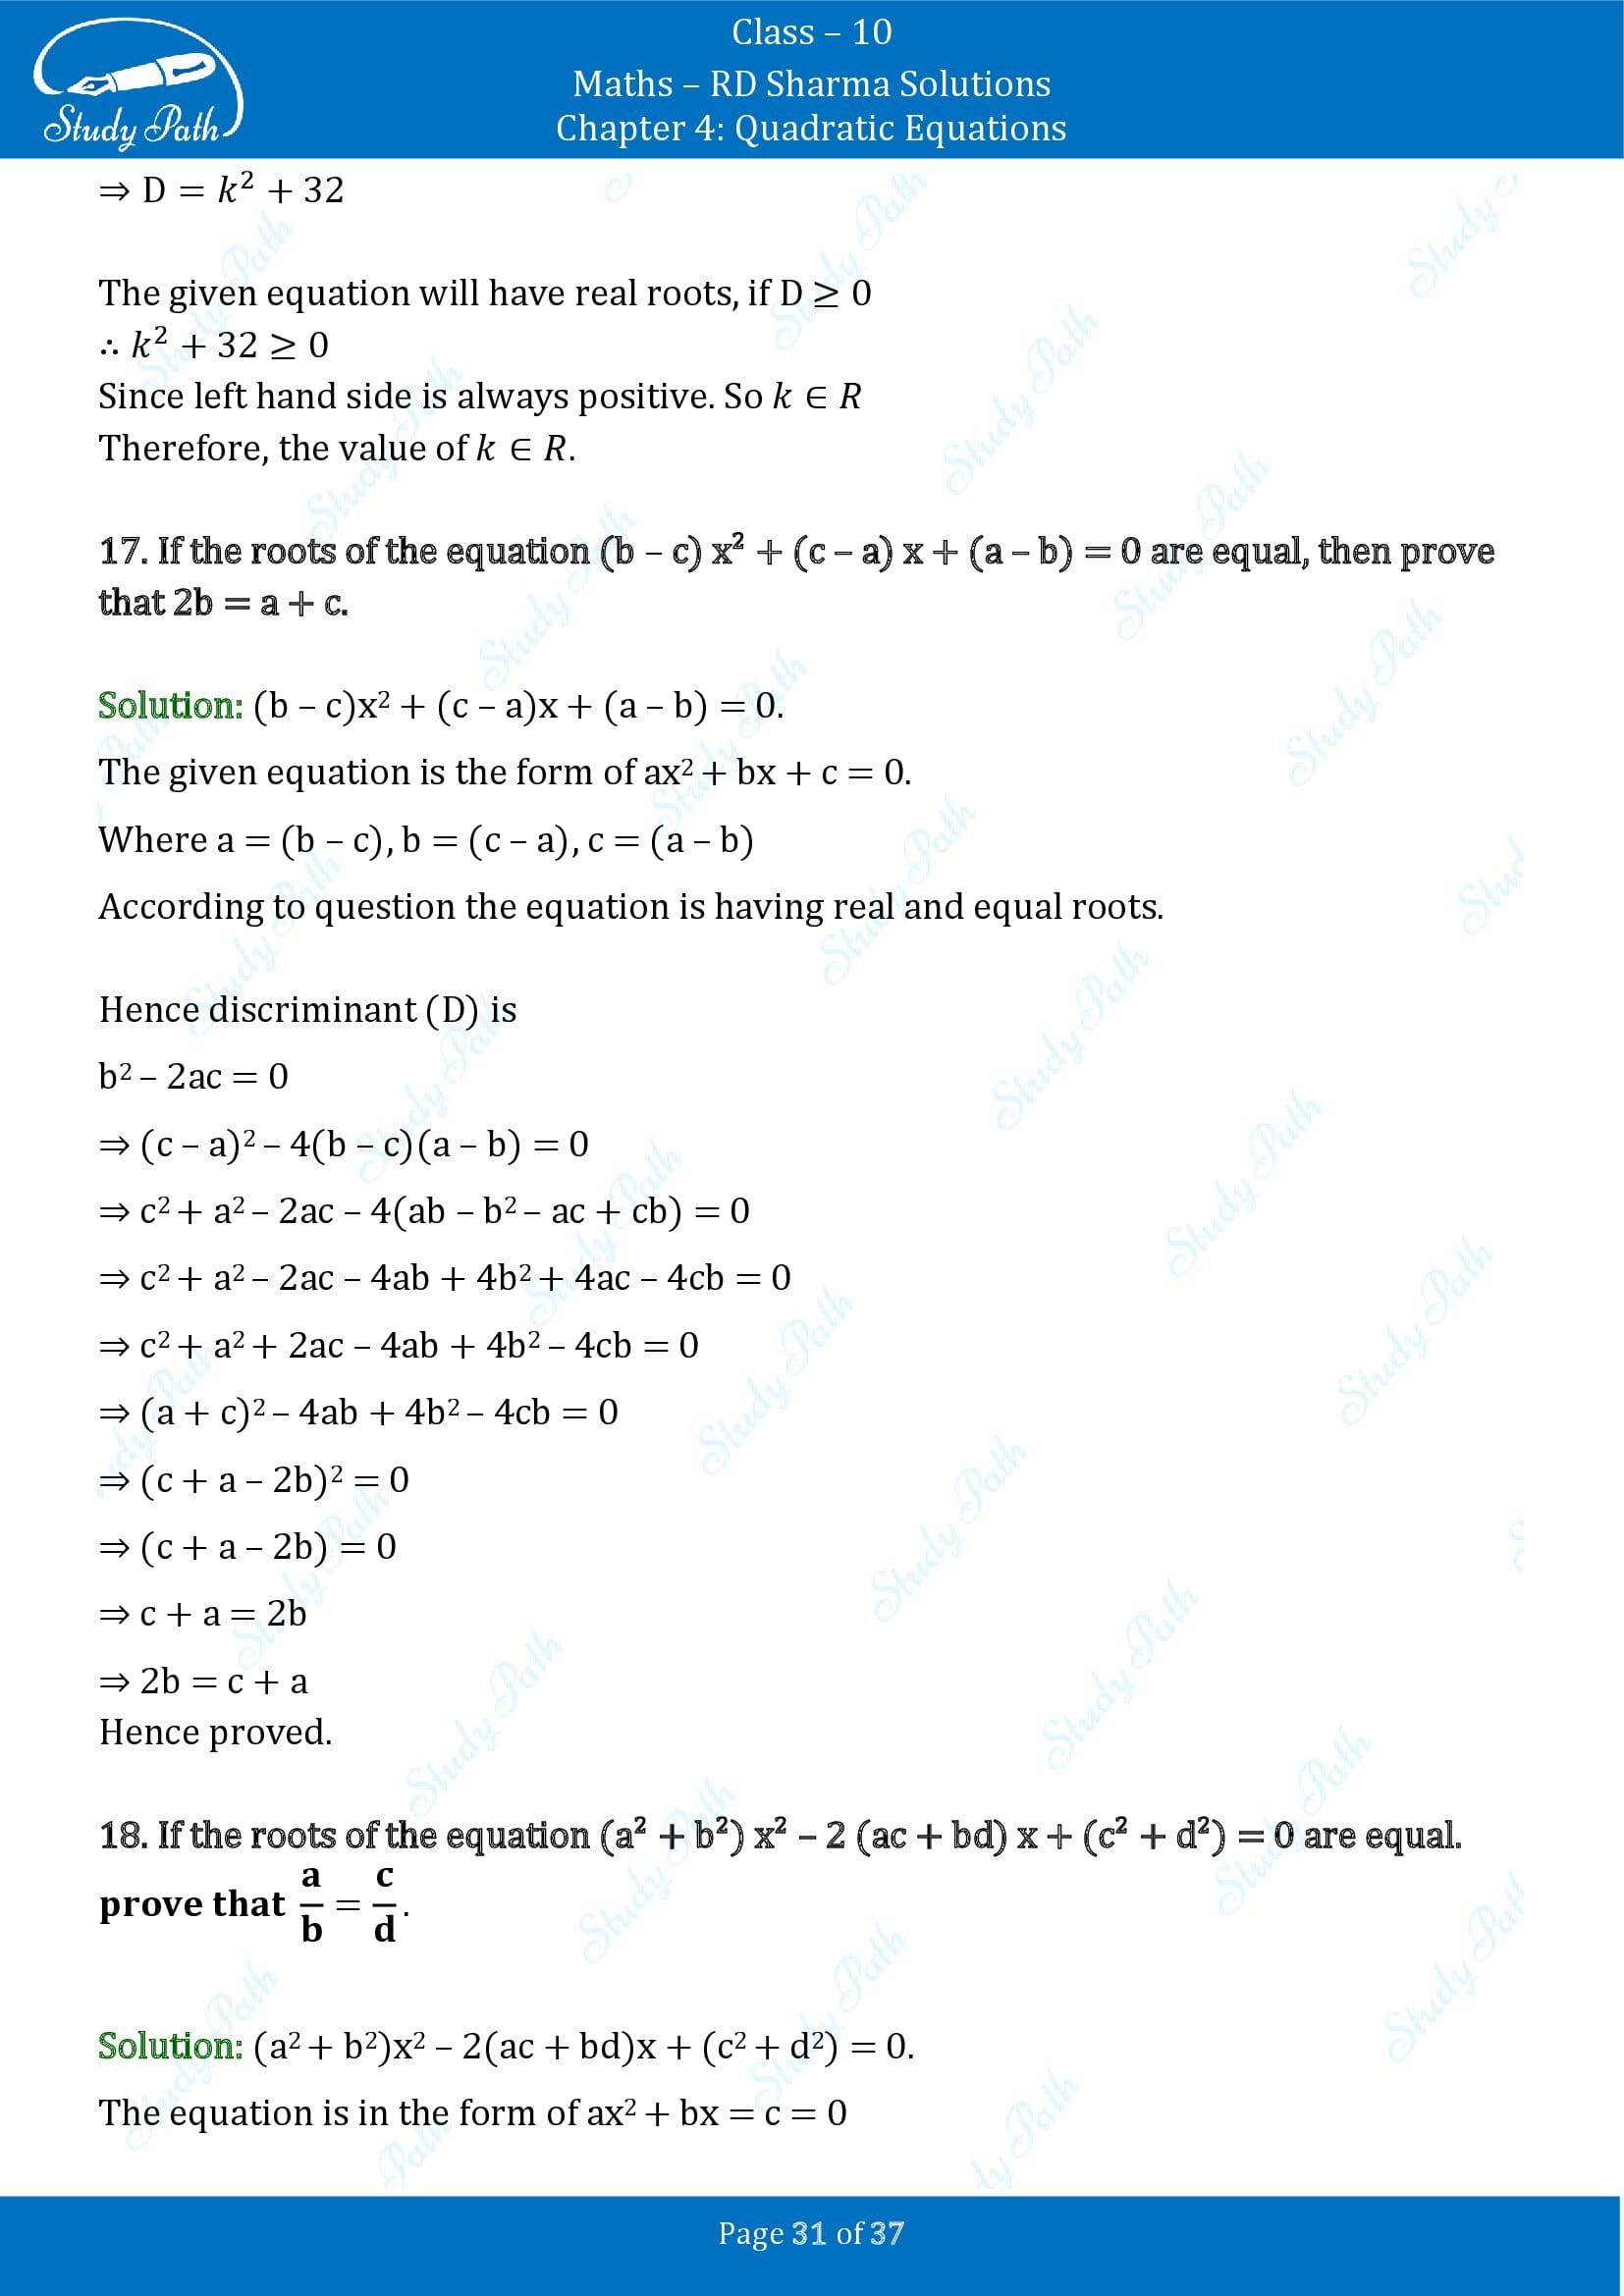 RD Sharma Solutions Class 10 Chapter 4 Quadratic Equations Exercise 4.6 00031